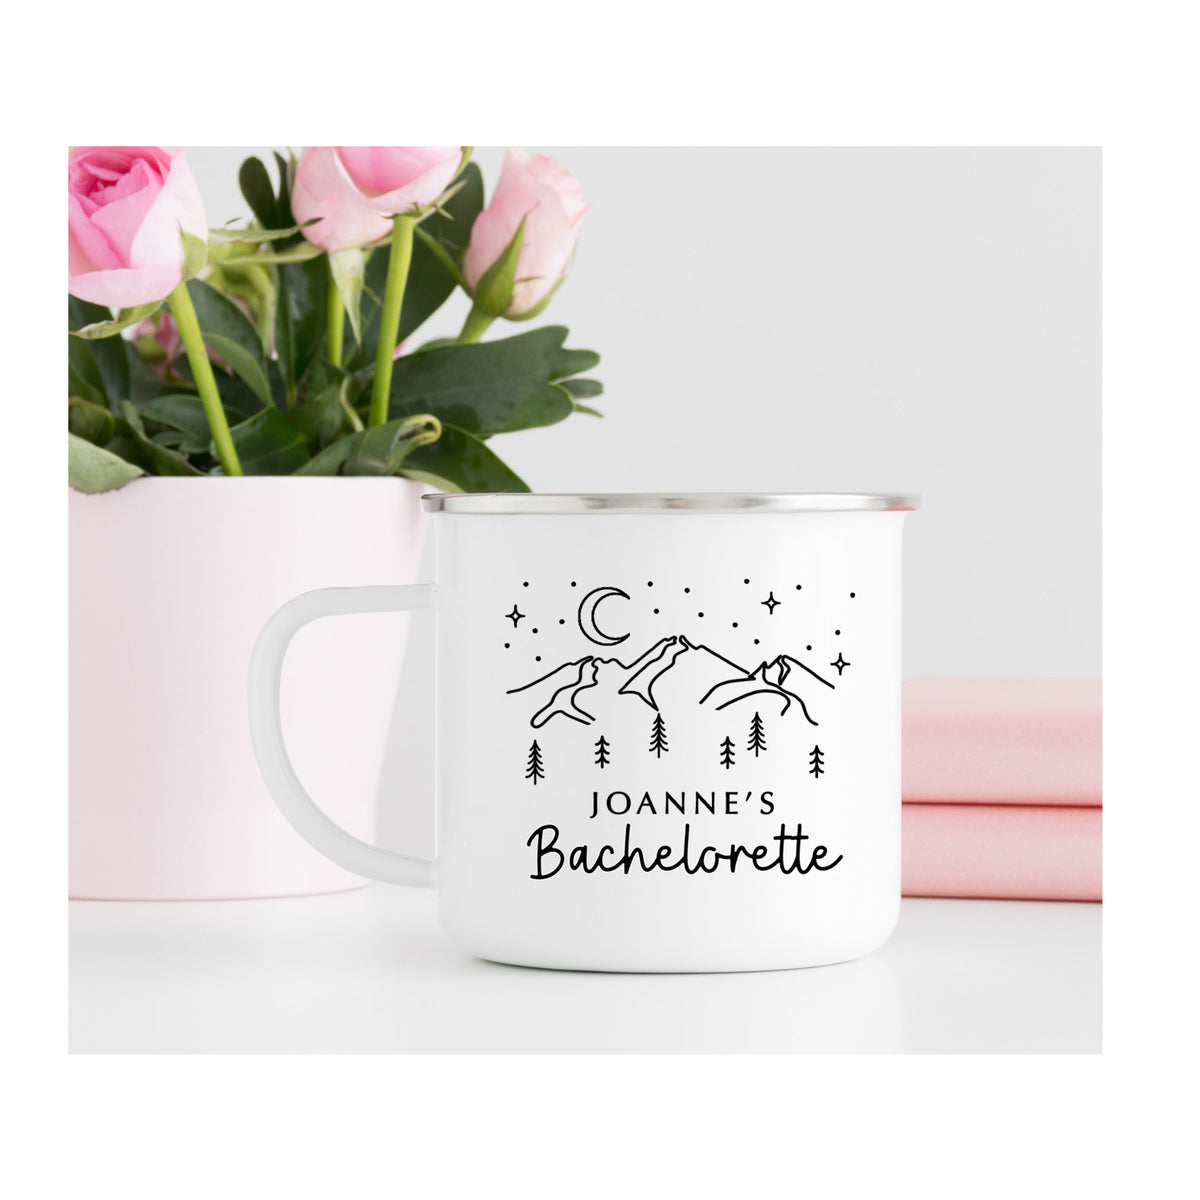 Bachelorette Party Mug with Mountains and Stars